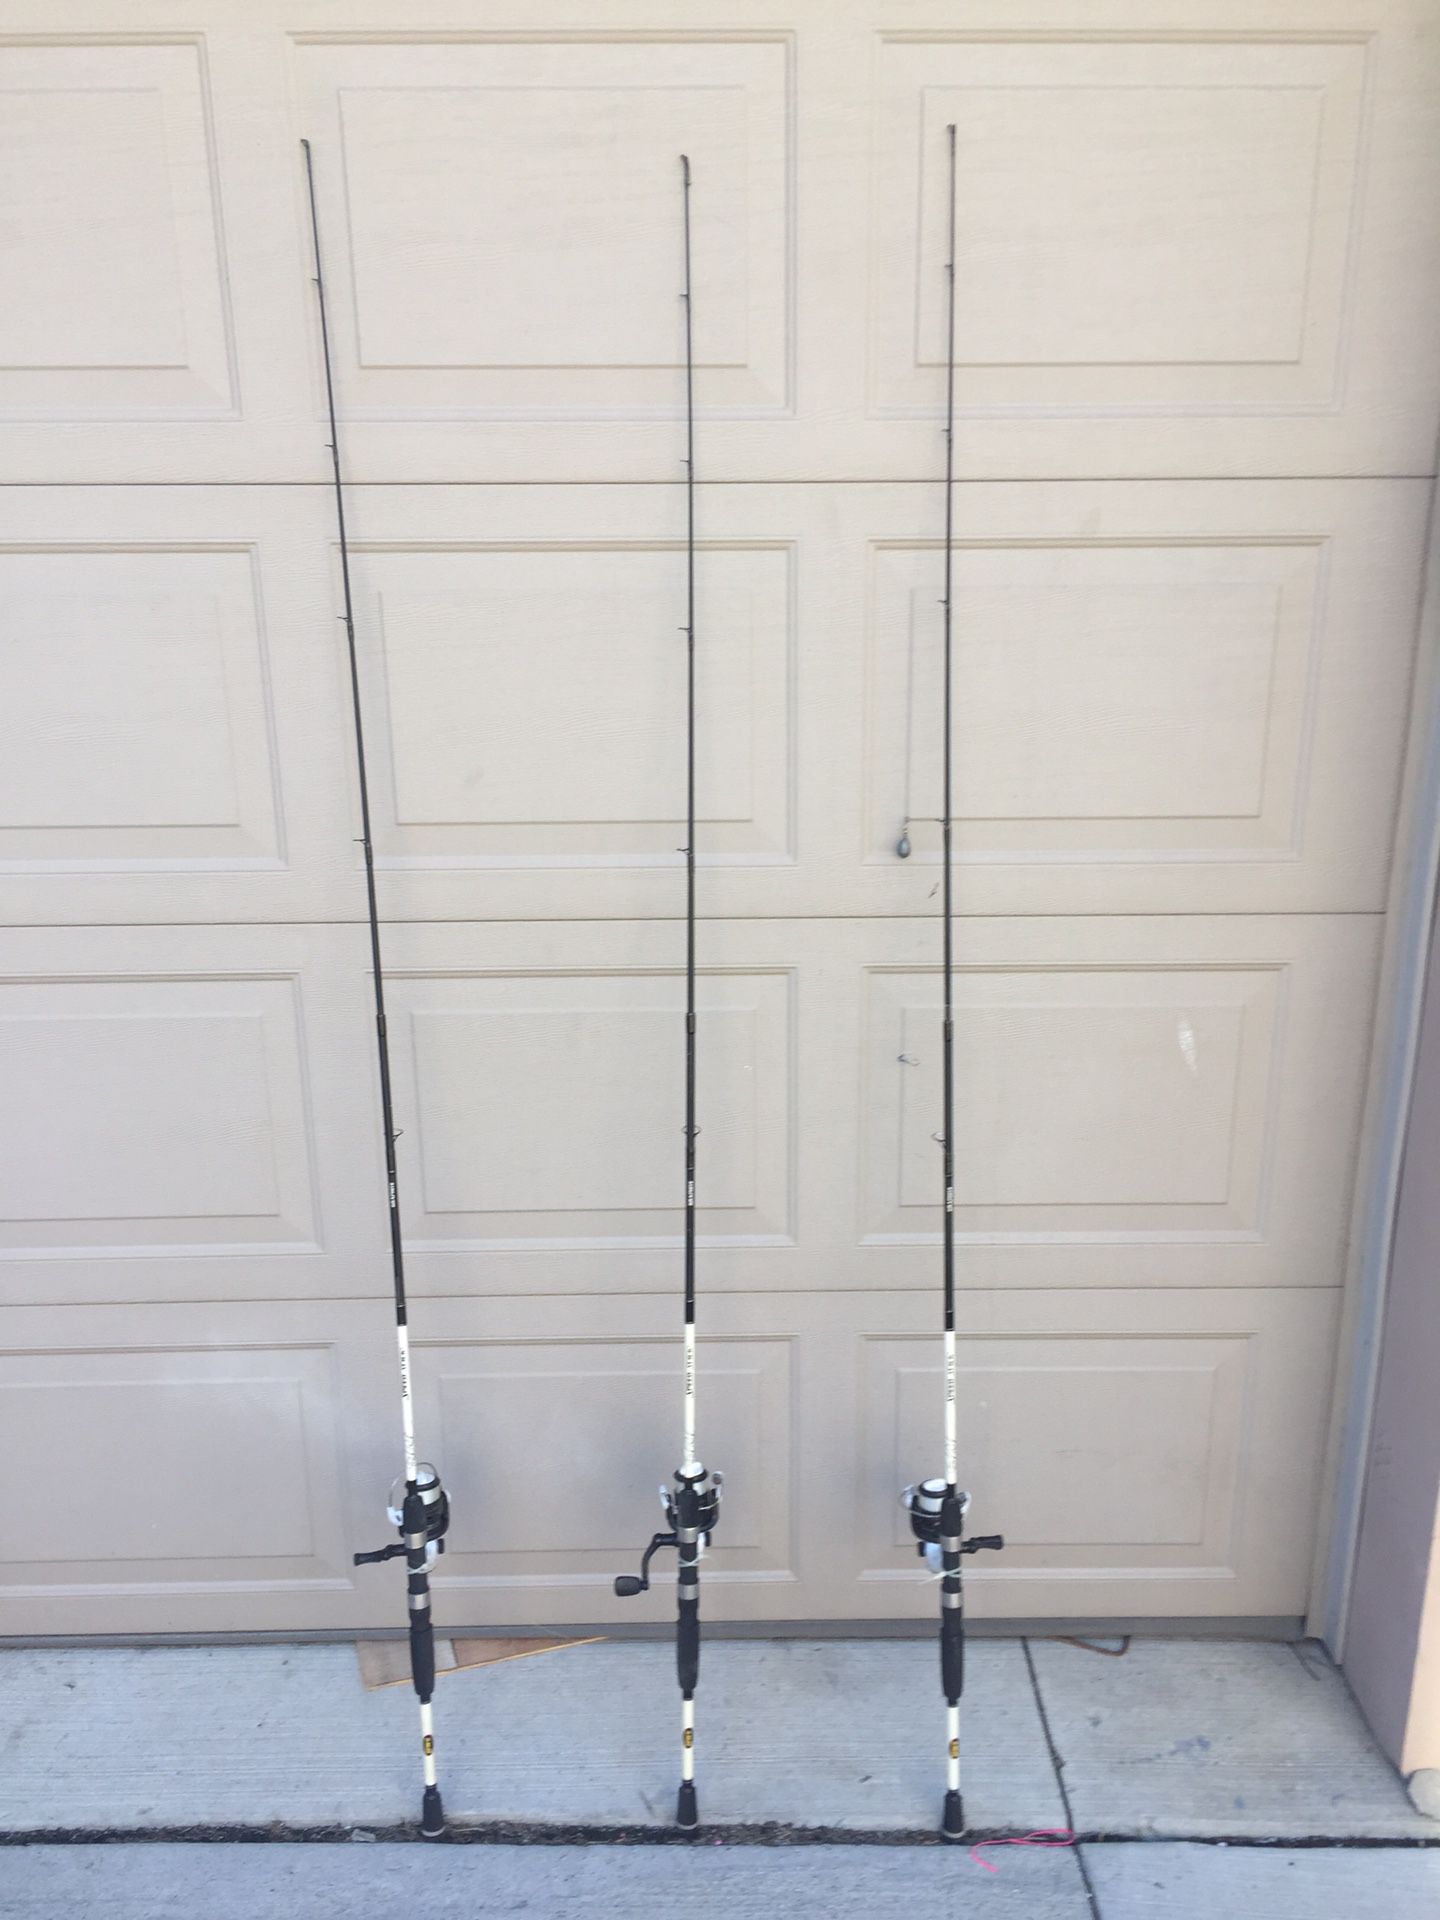 Lews fishing rods excellent condition three of them 30$ each